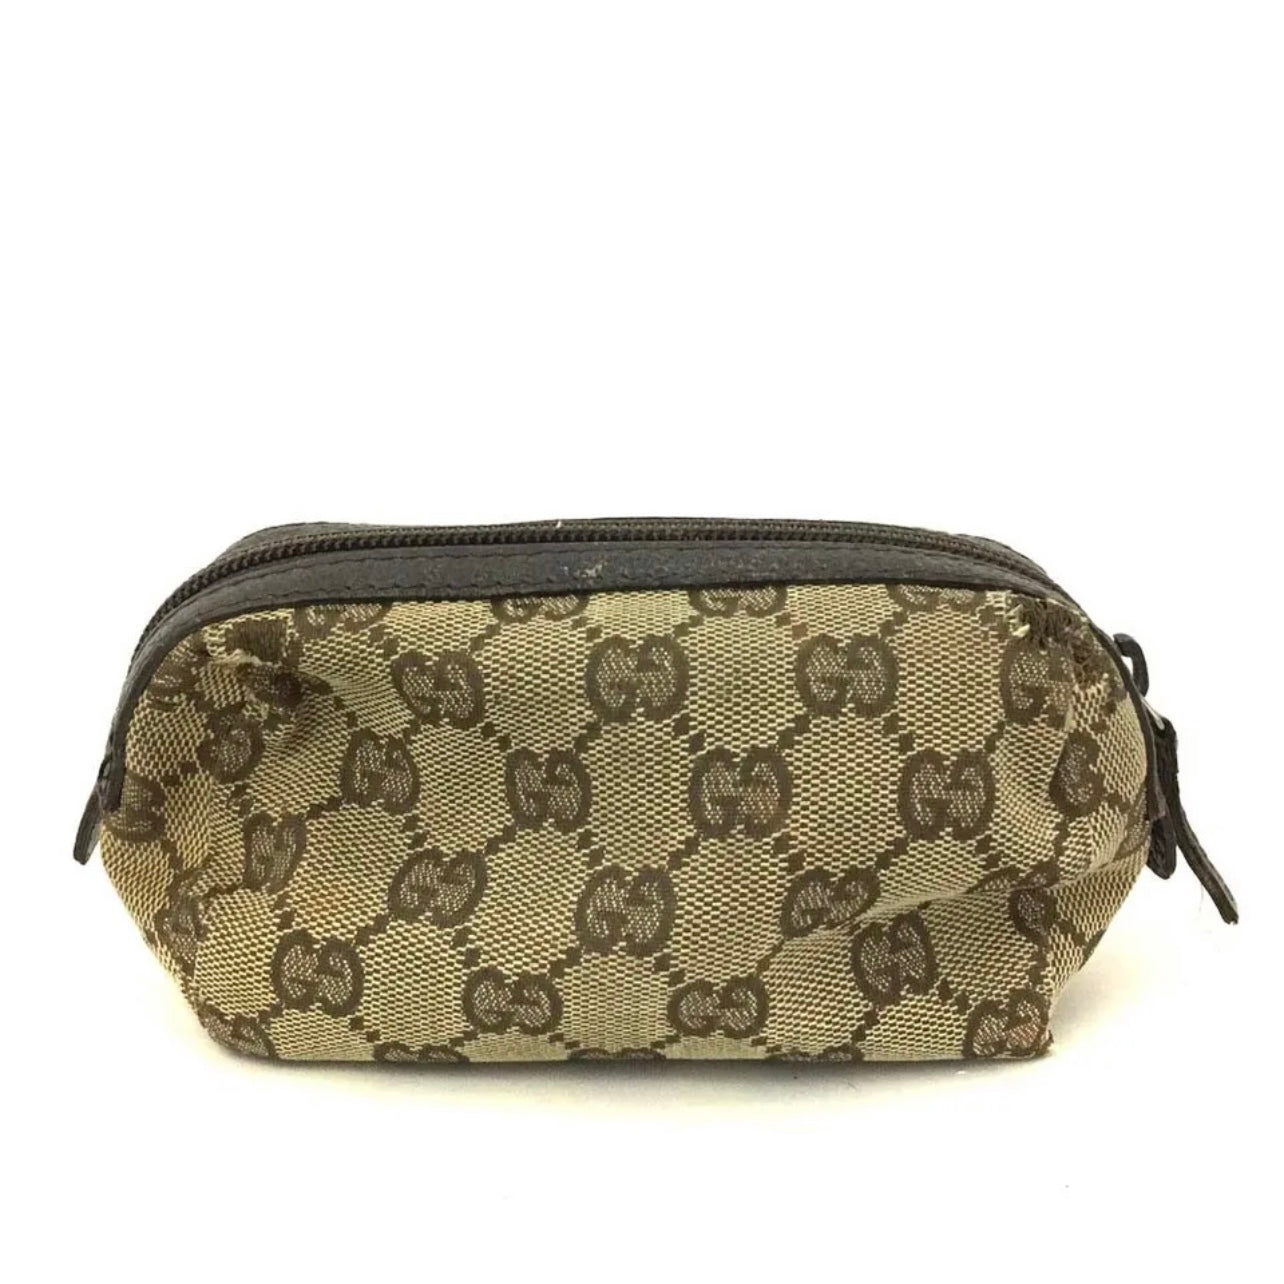 Gucci Canvas Cosmetic Pouch